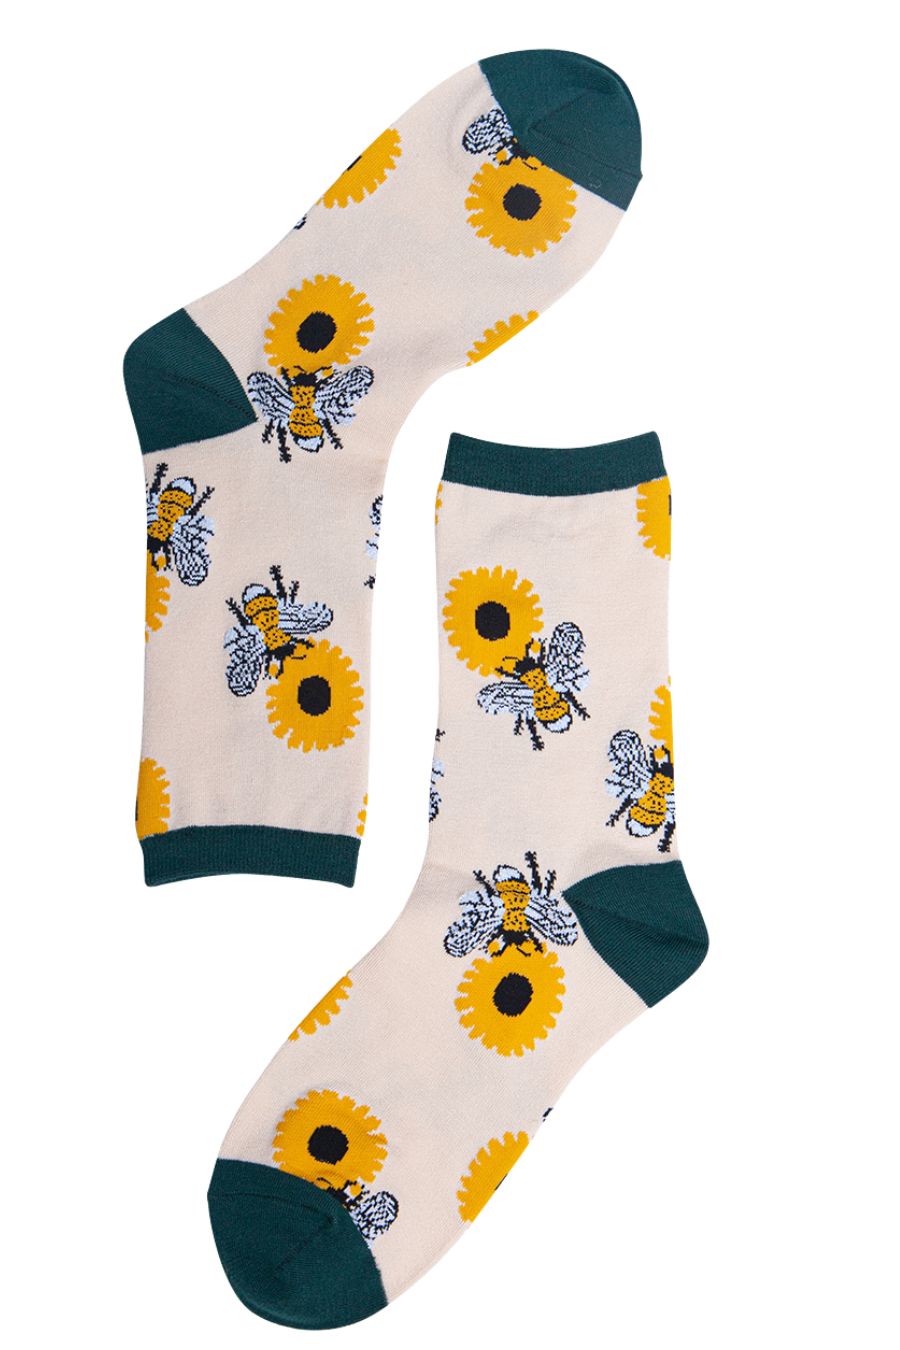 cream, green ankle socks with bees and sunflowers